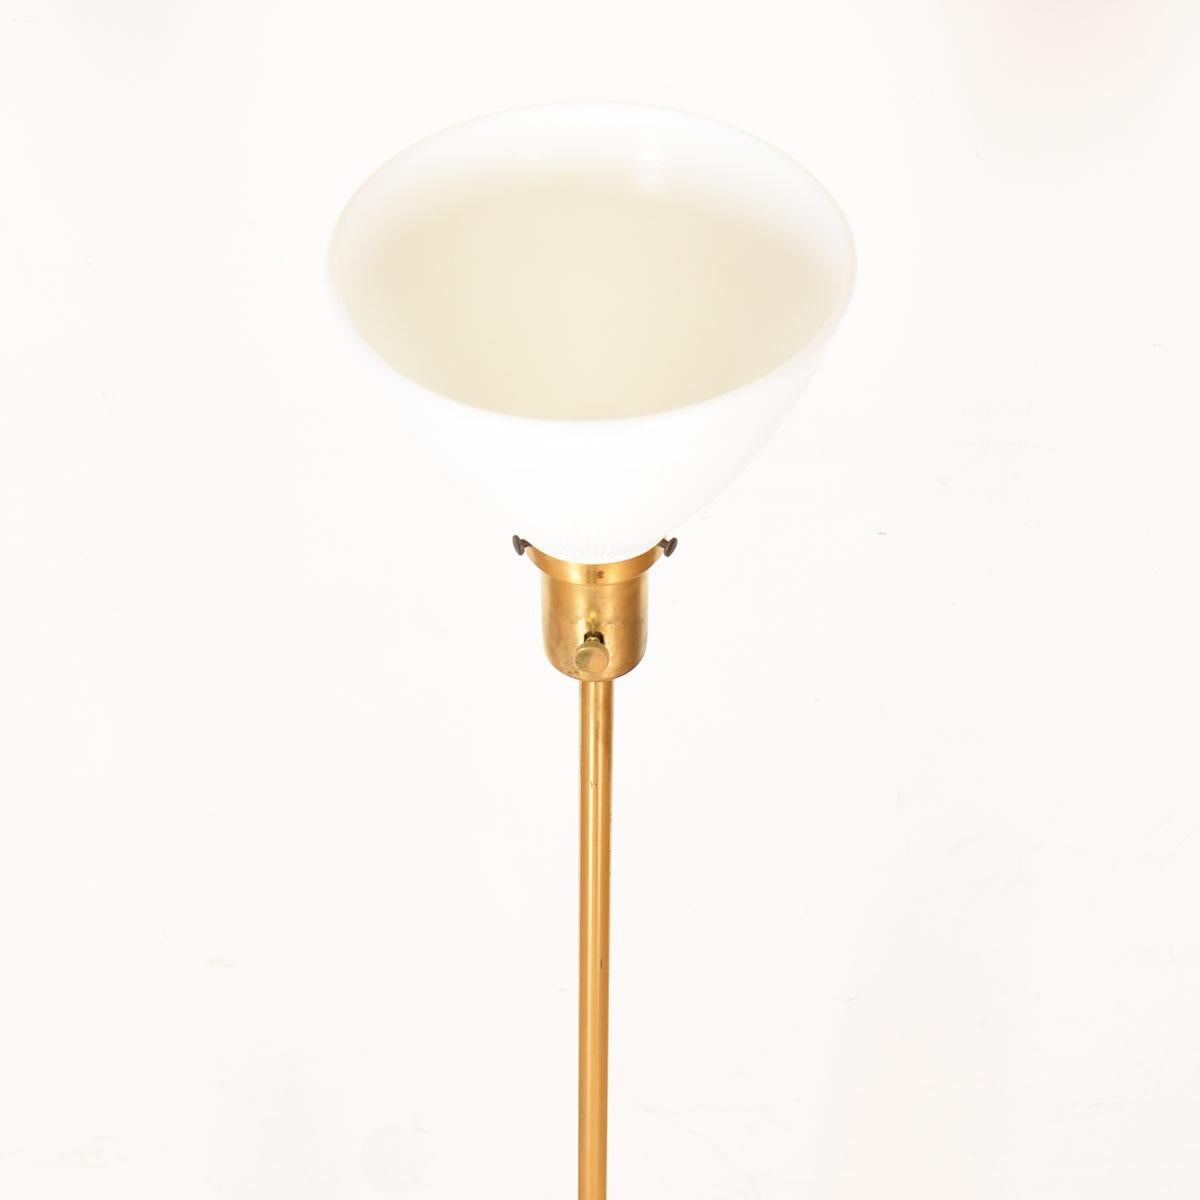 American Midcentury Paul McCobb Brass Tripod ‘Torchiere’ Accent Lamp For Sale